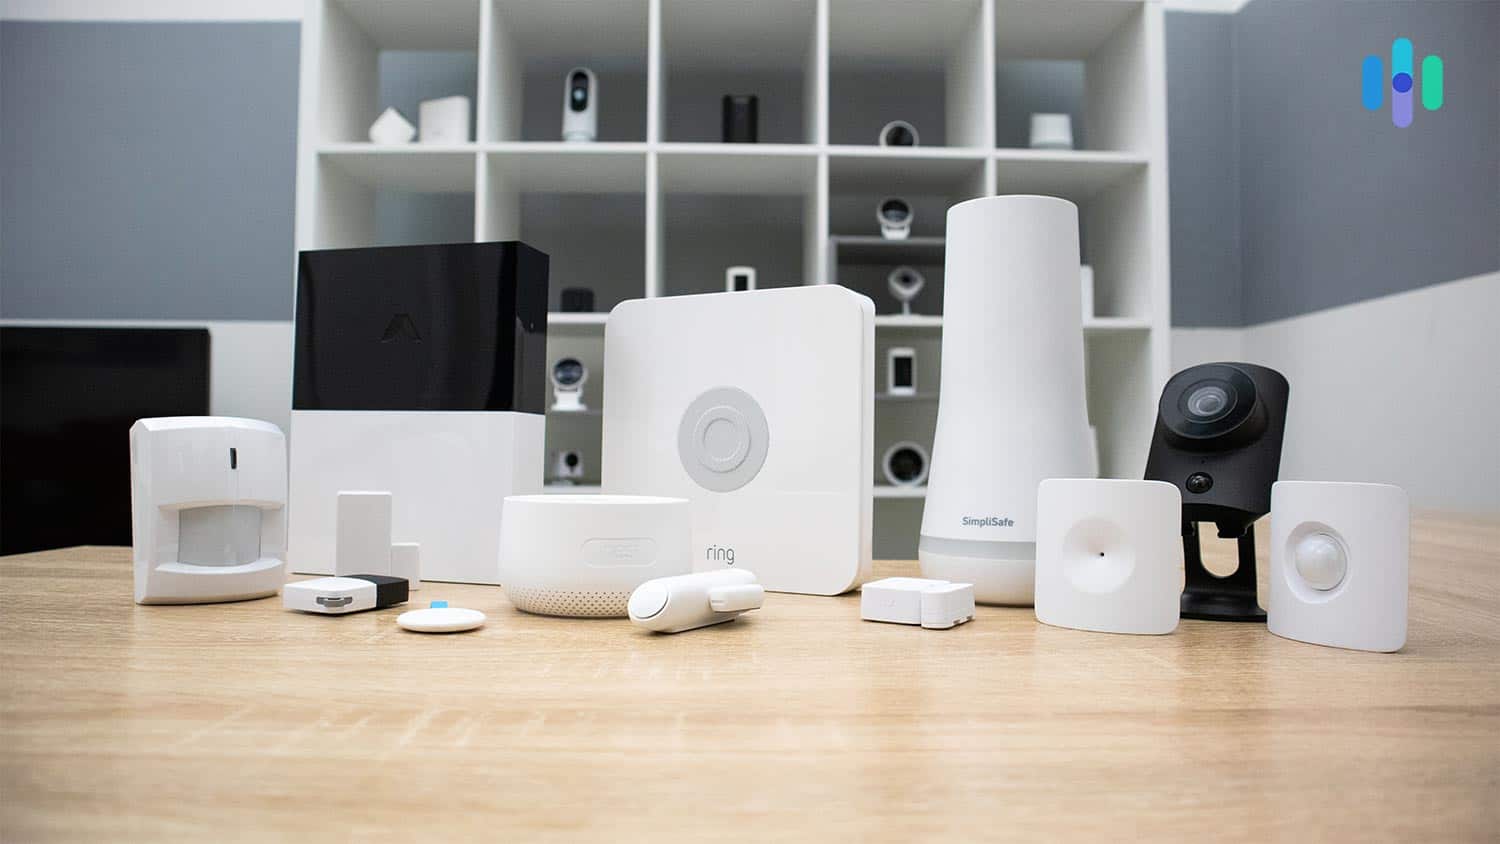 Abode, Ring Alarm, and SimpliSafe security systems side-by-side